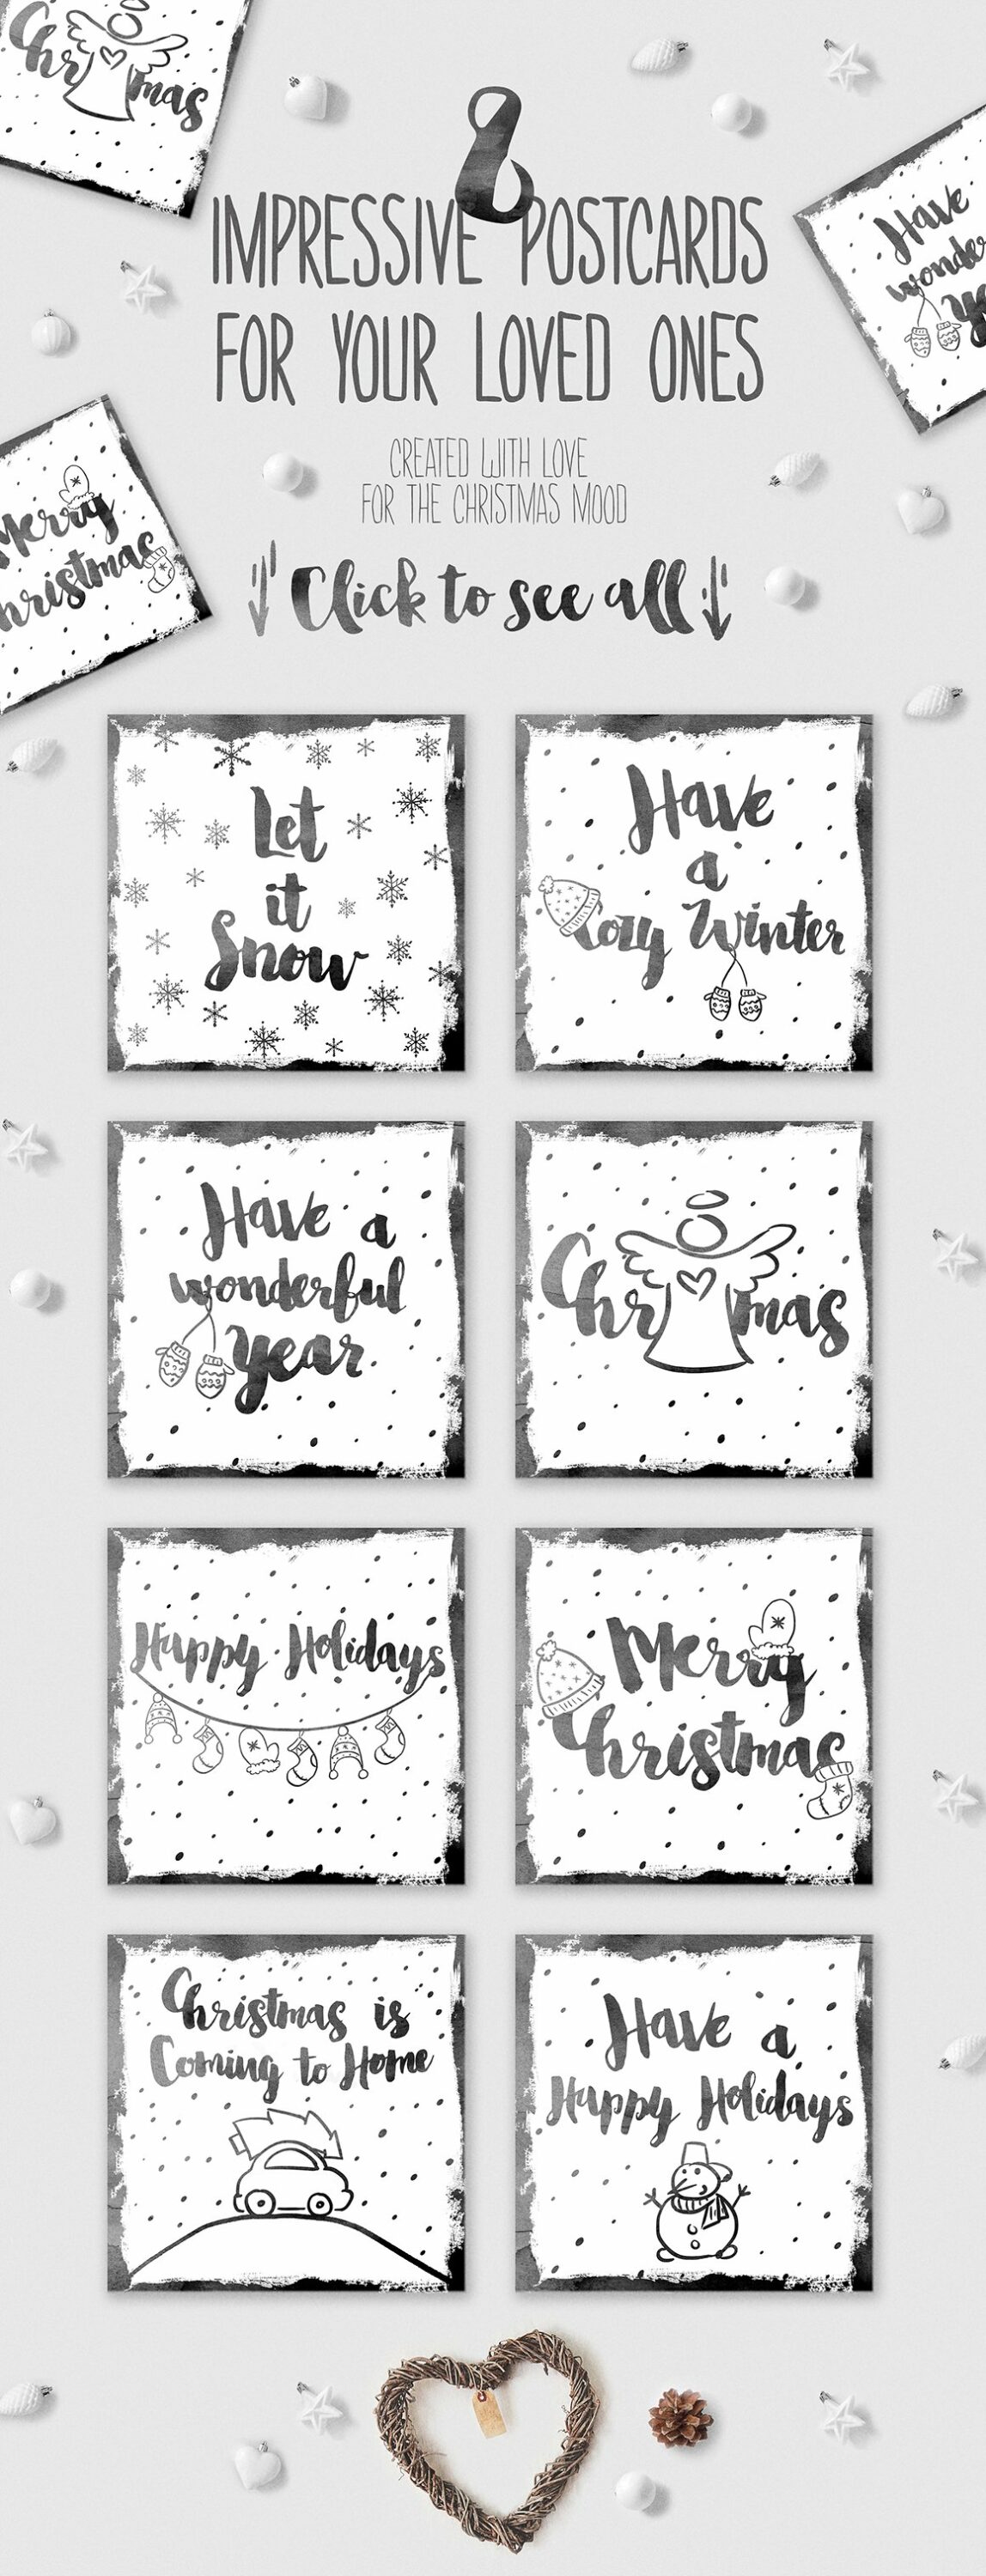 A set of 8 black different impressive postcards for your loved ones on a gray background.